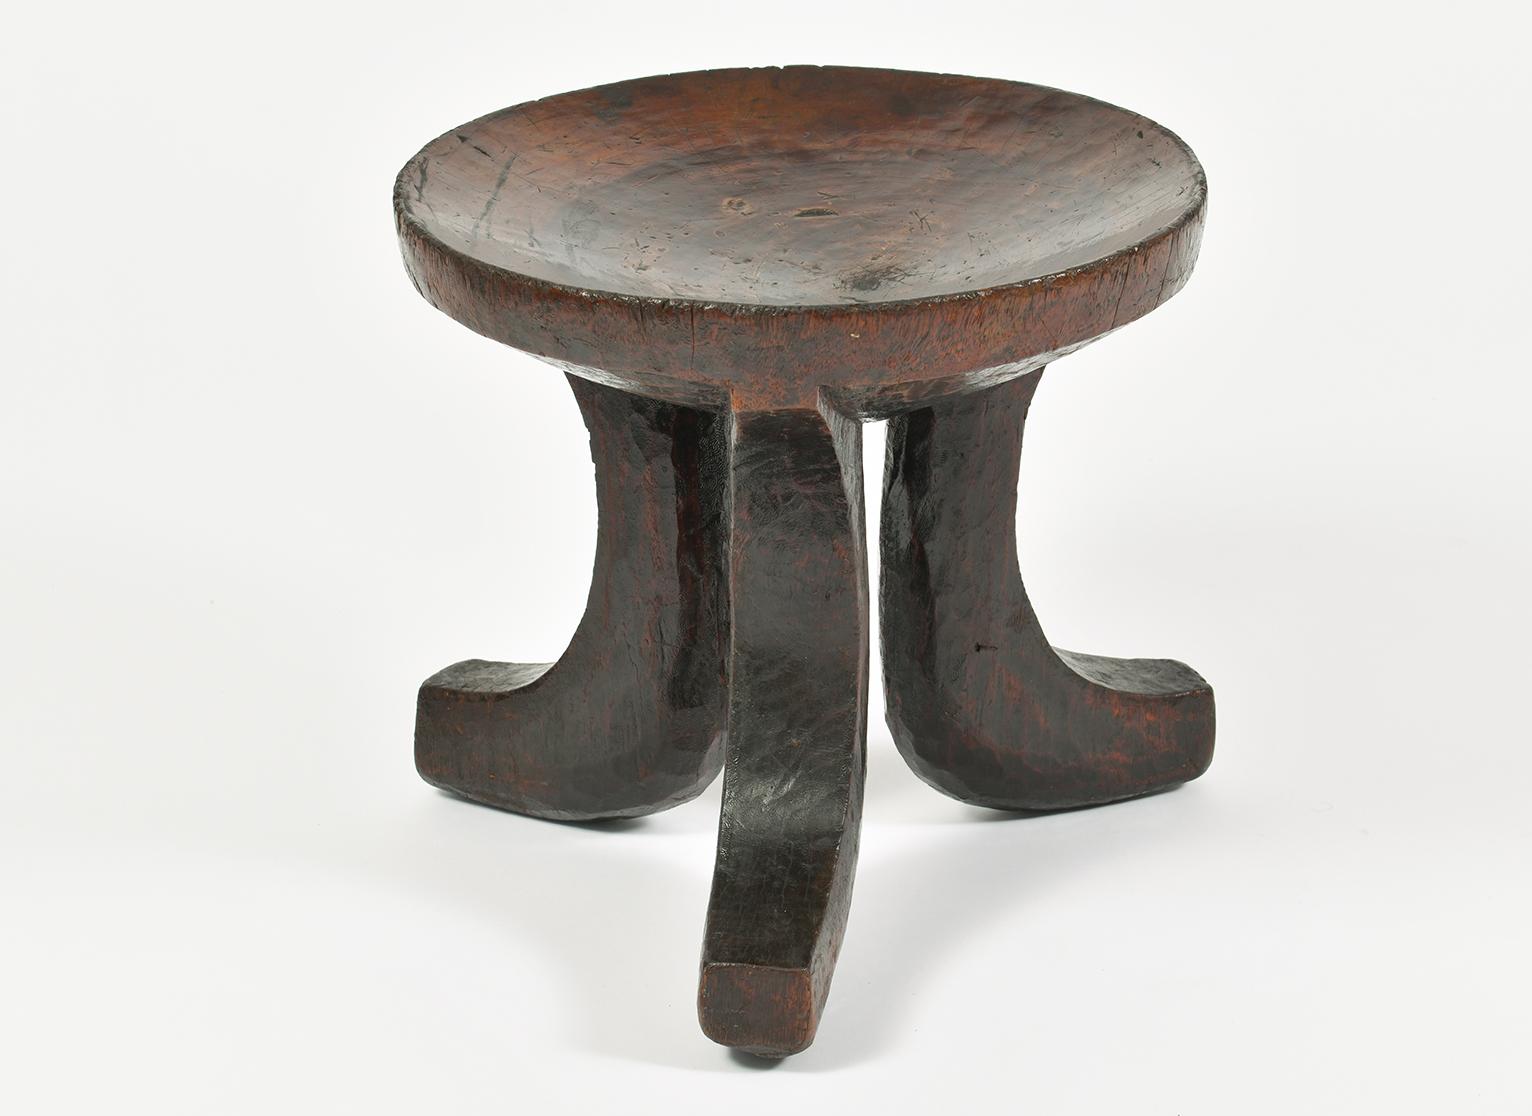 A tribal carved wood tripod stool
Africa, probably Ethiopia, mid-20th century.